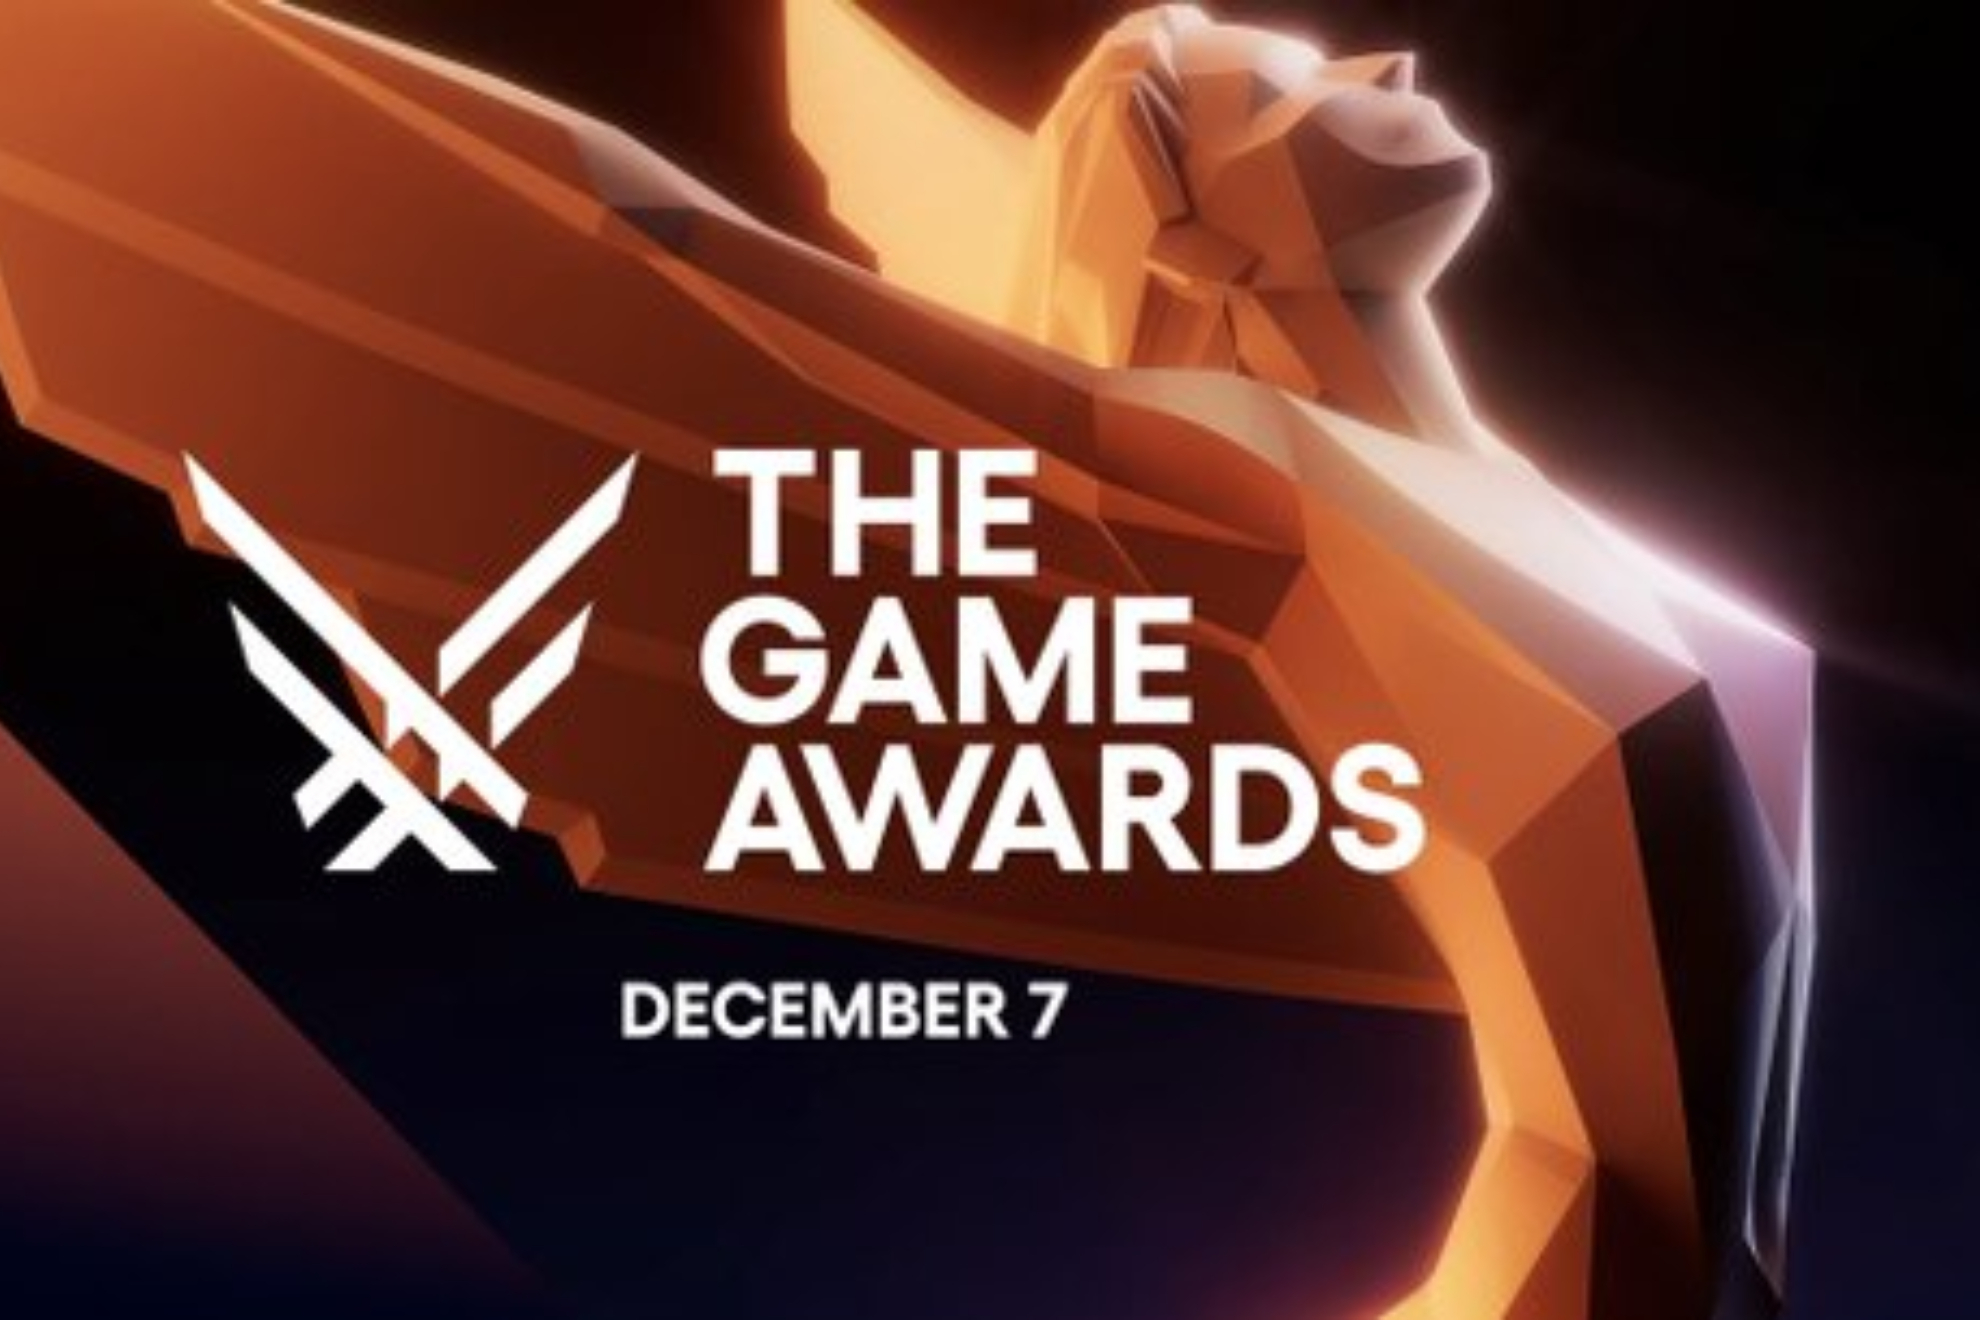 Every announcement from The Game Awards 2023